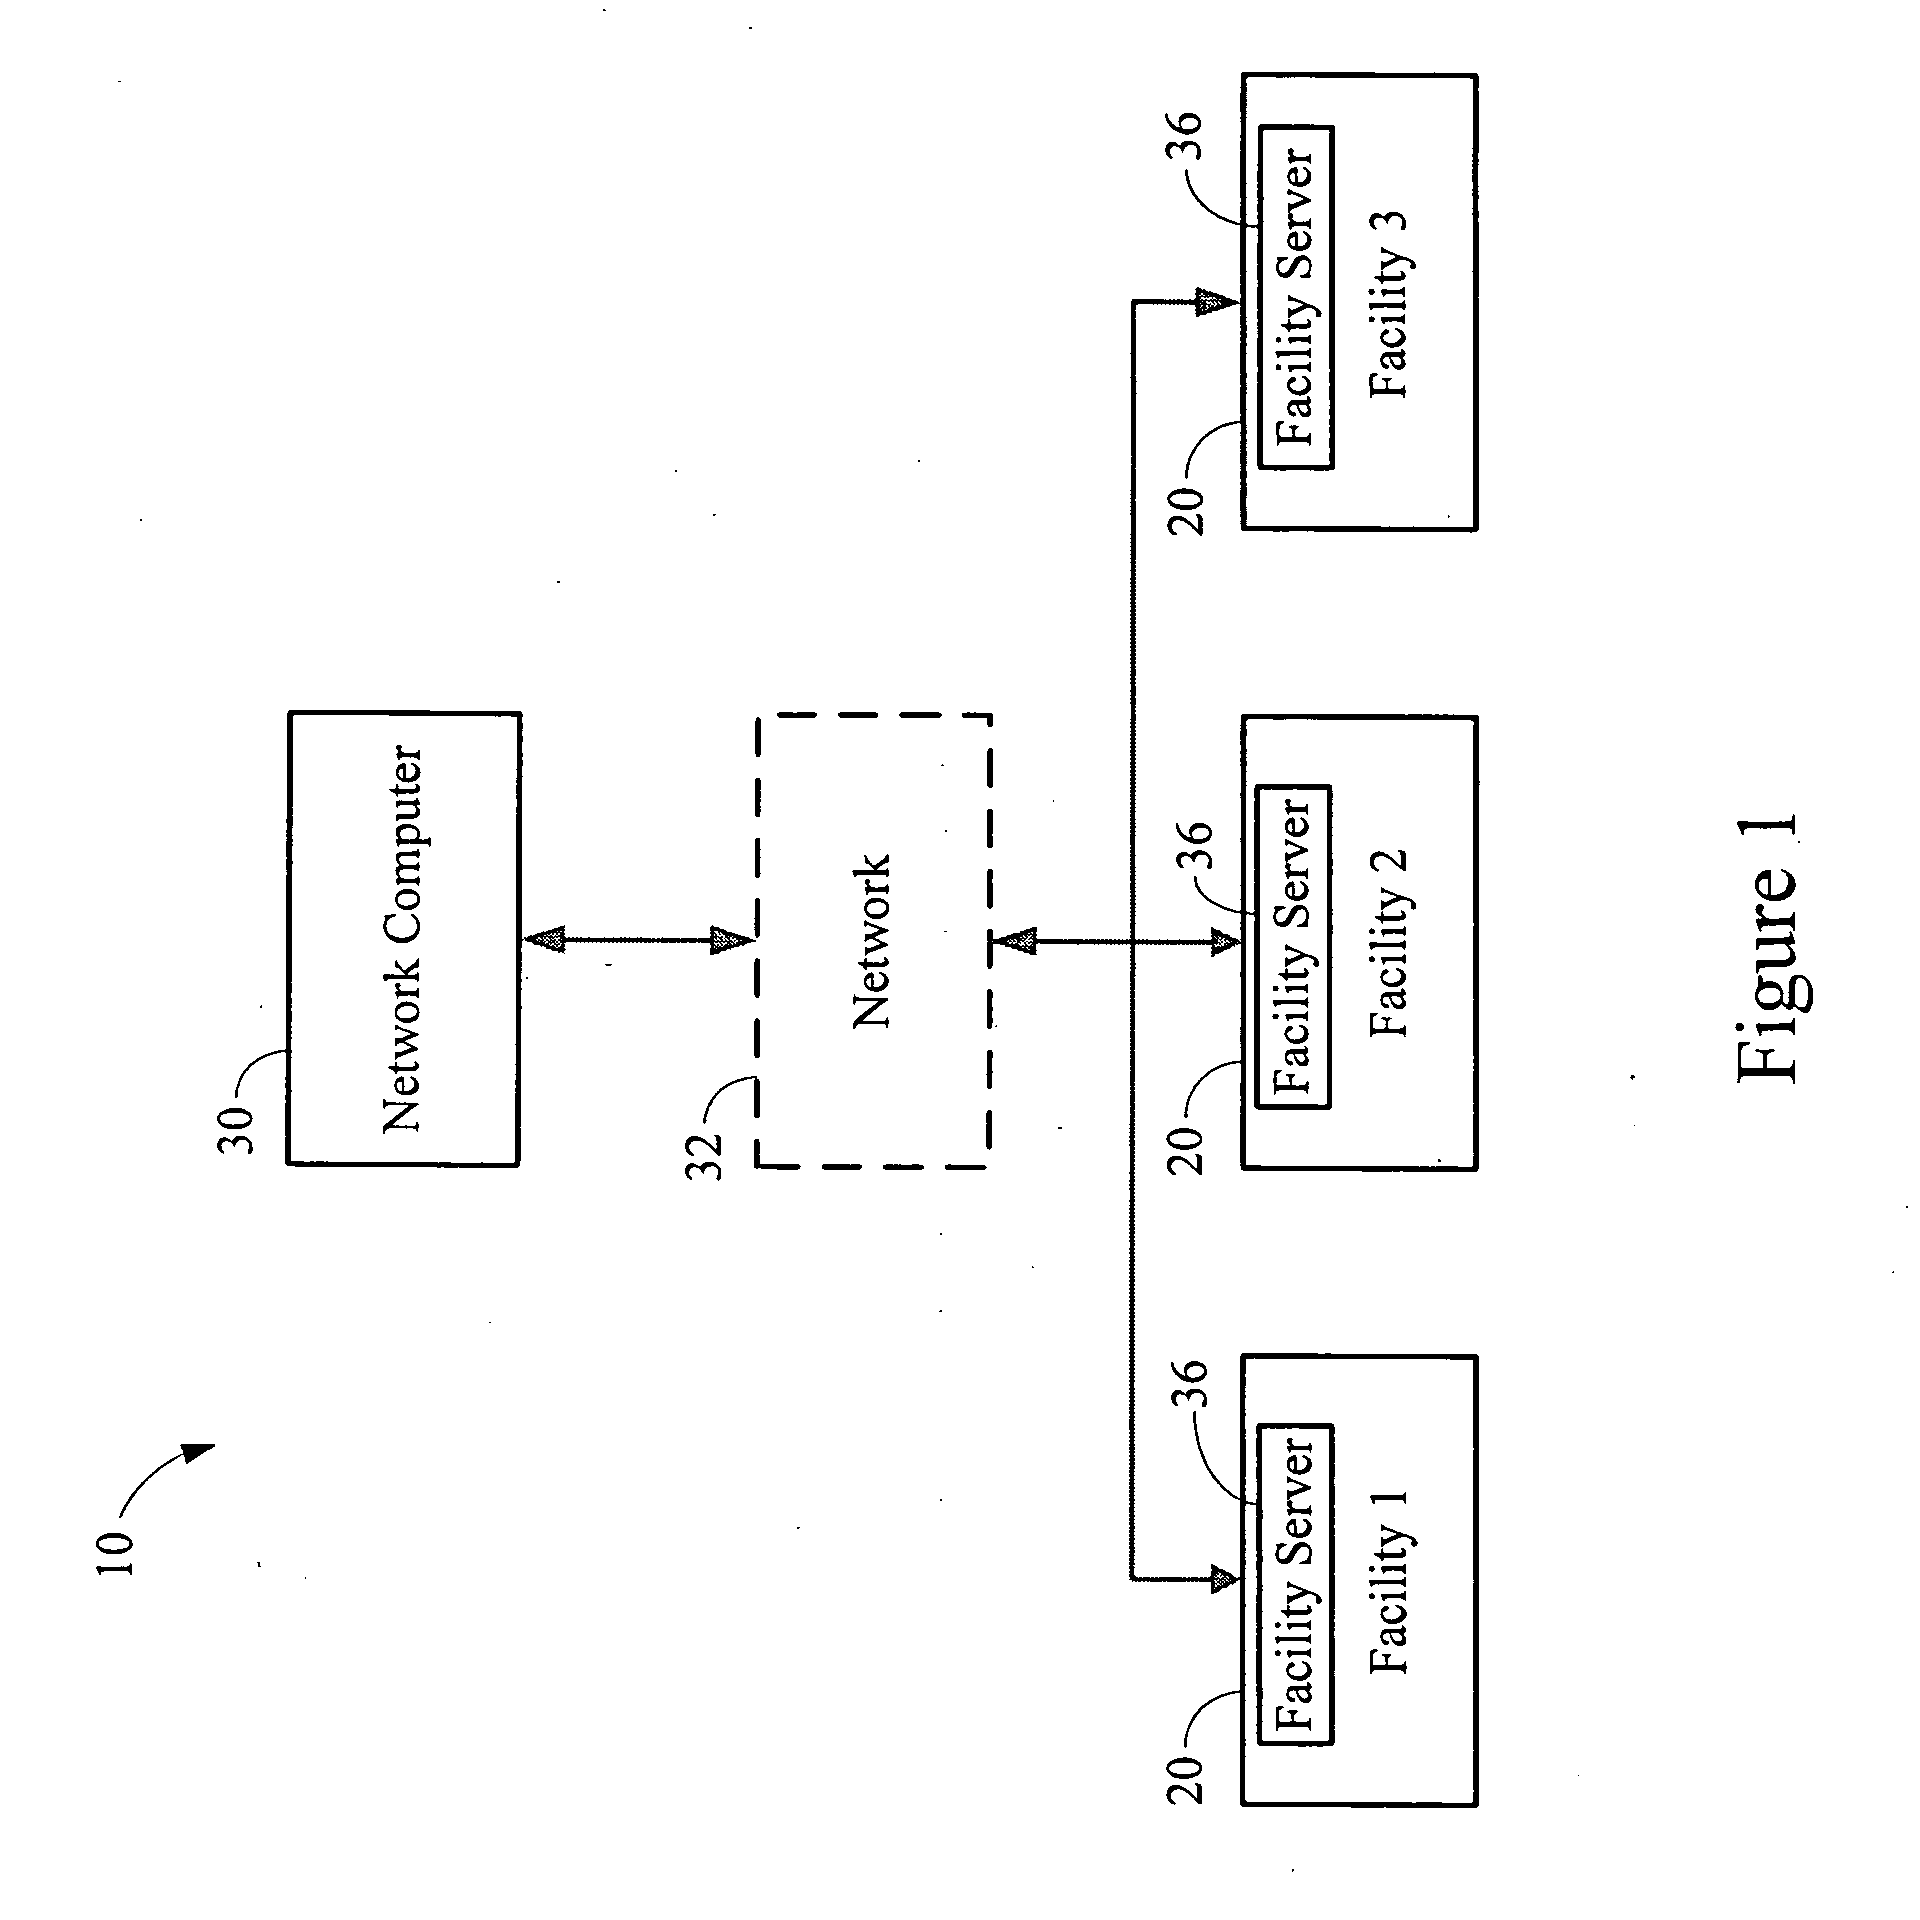 System for separating and distributing pharmacy order processing for medication payments